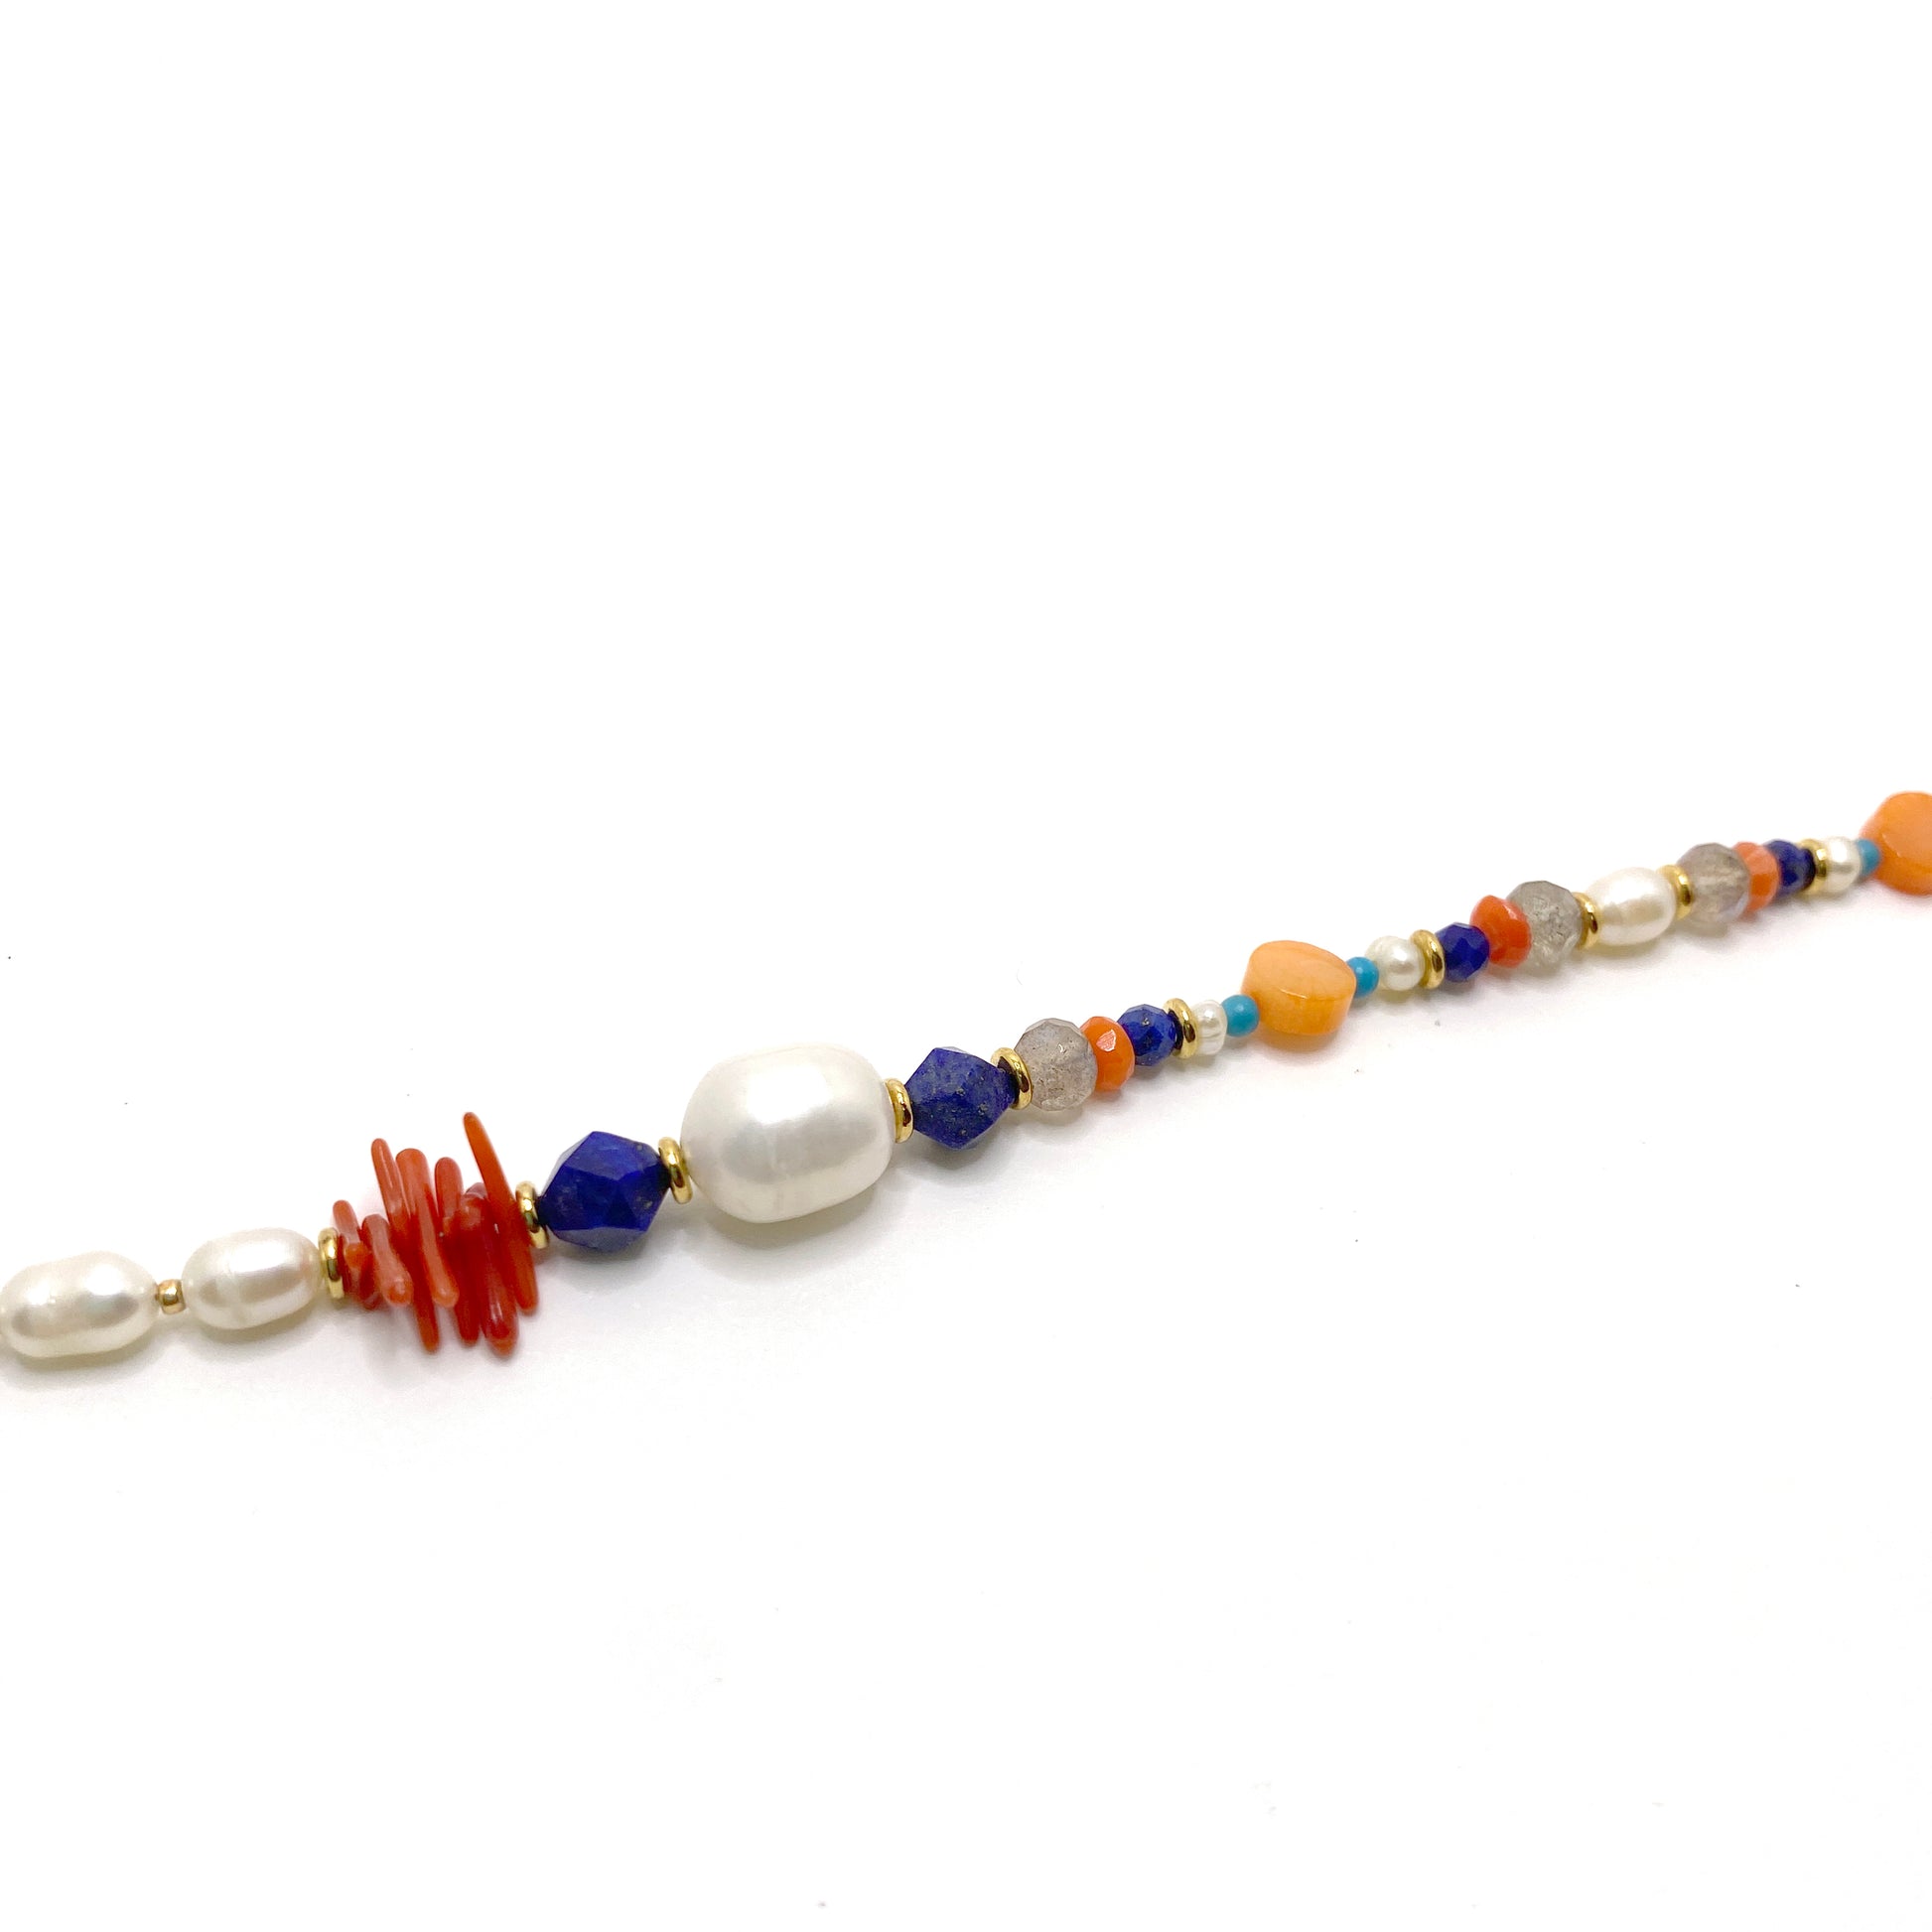 Asymmetrical peal and ocean-inspired gemstone necklace. Just over half of the necklace is made from small oblong freshwater pearls interspersed with gold seed beads. The rest is a pattern of vintage coral, lapis lazuli, pearl, labradorite, and gold and turquoise coloured spacer beads.